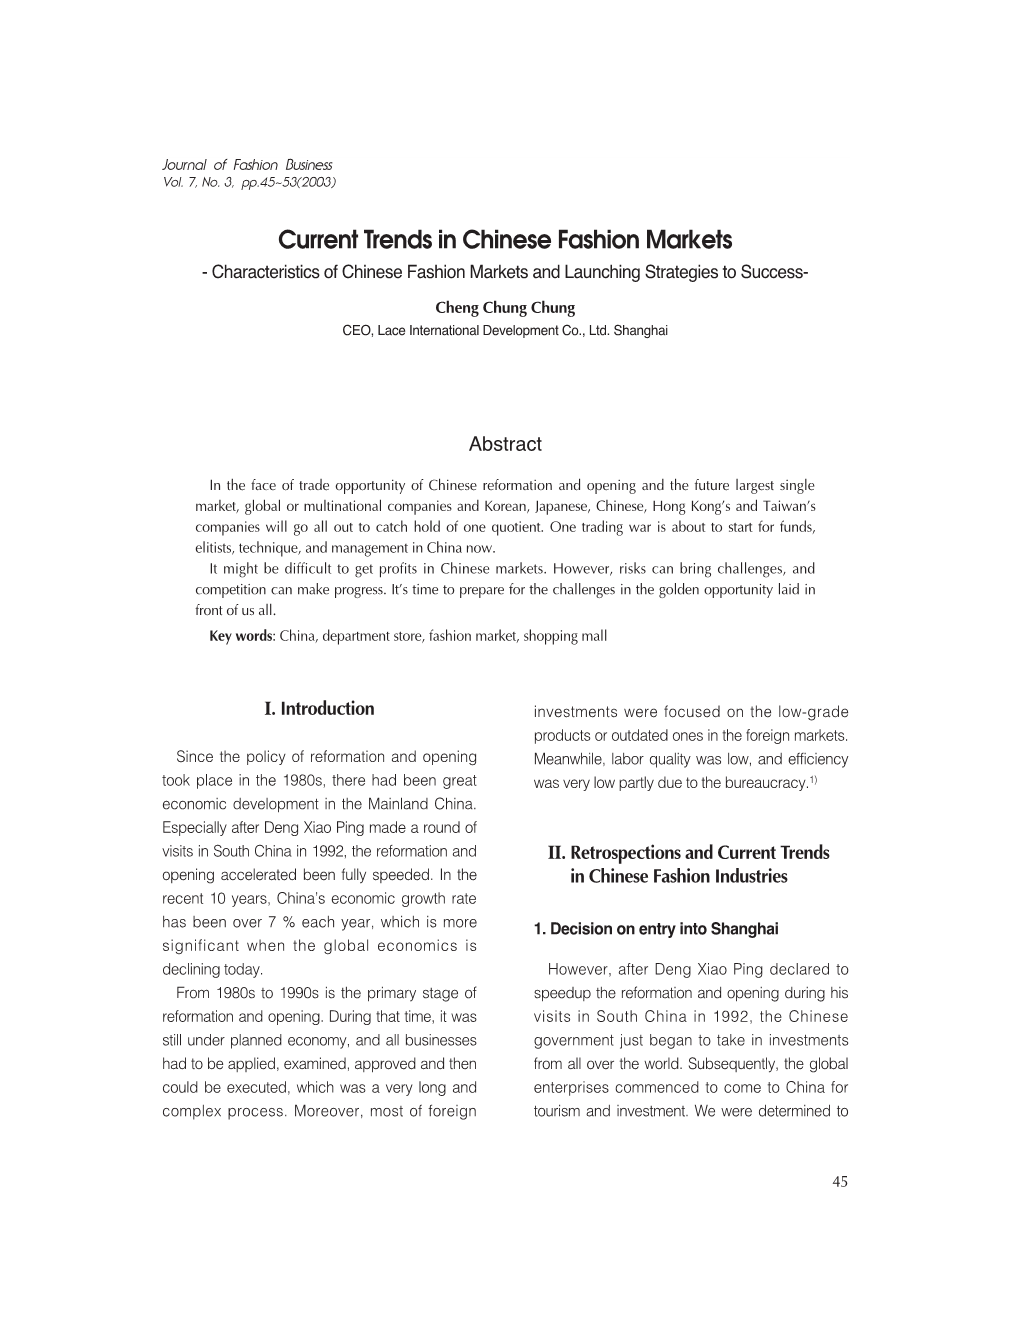 Current Trends in Chinese Fashion Markets - Characteristics of Chinese Fashion Markets and Launching Strategies to Success